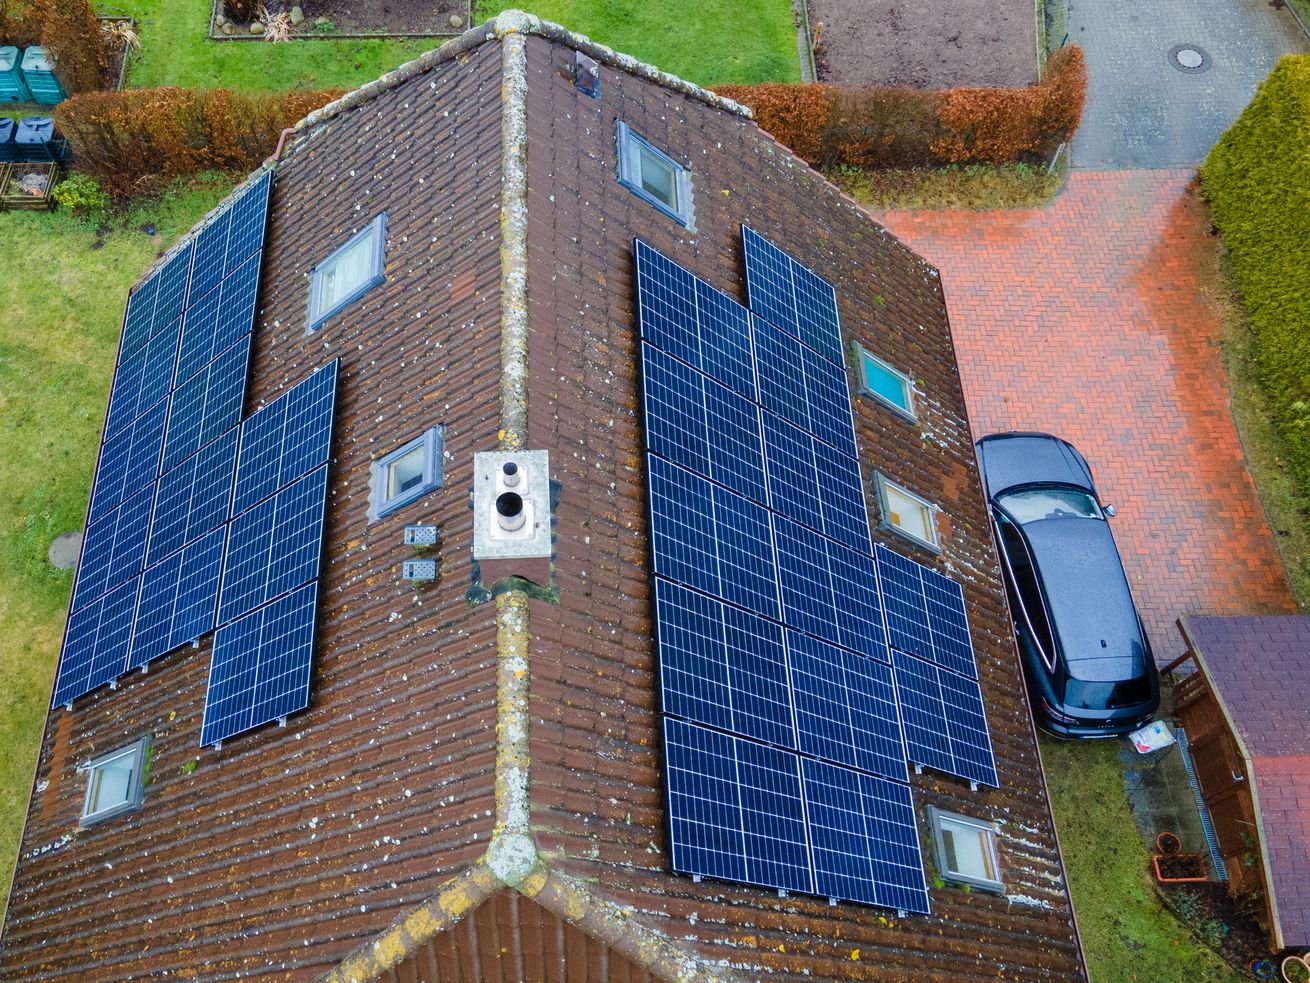 The roof of a house with solar panels, viewed from above.